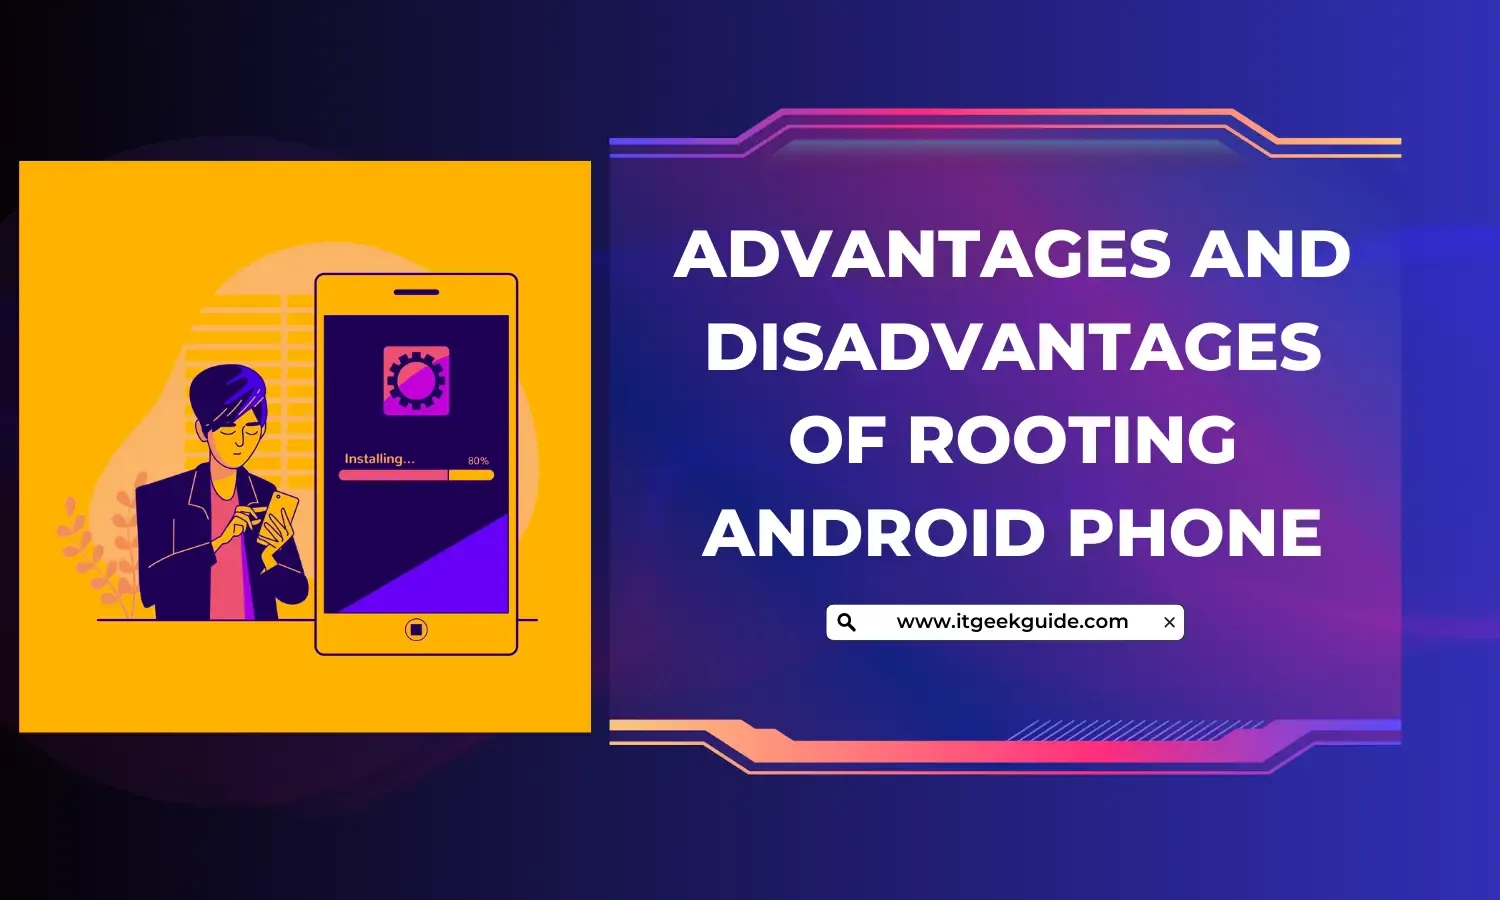 Advantages and disadvantages of rooting Android phone